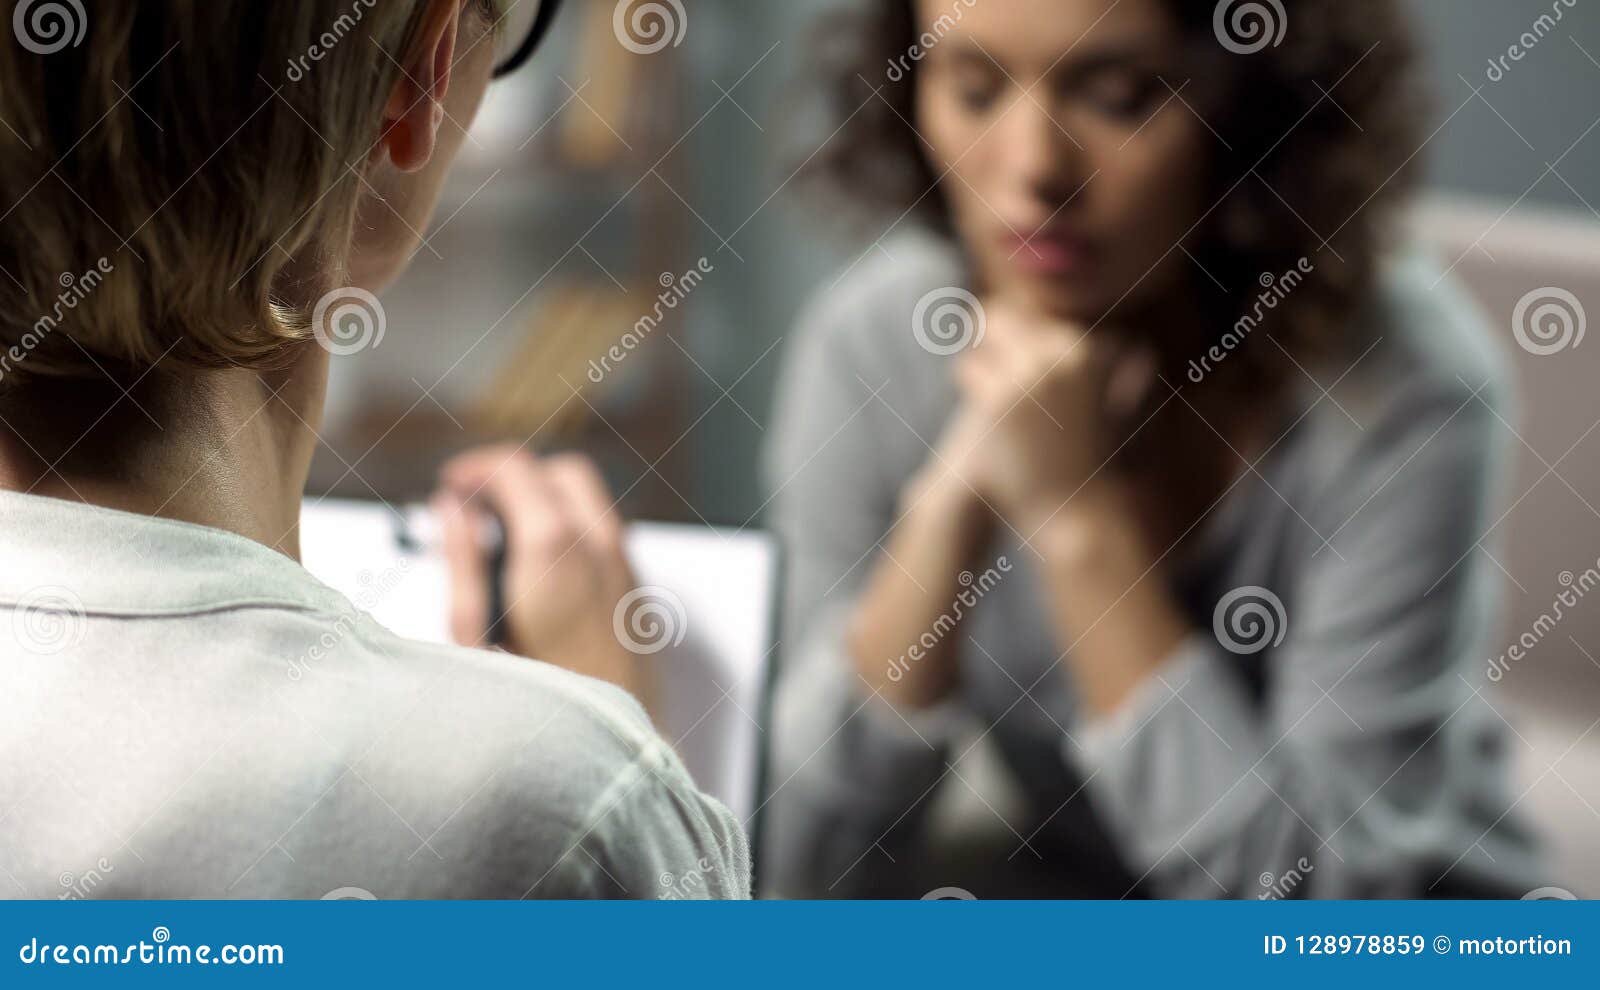 young depressed woman talking to lady psychologist during session, mental health